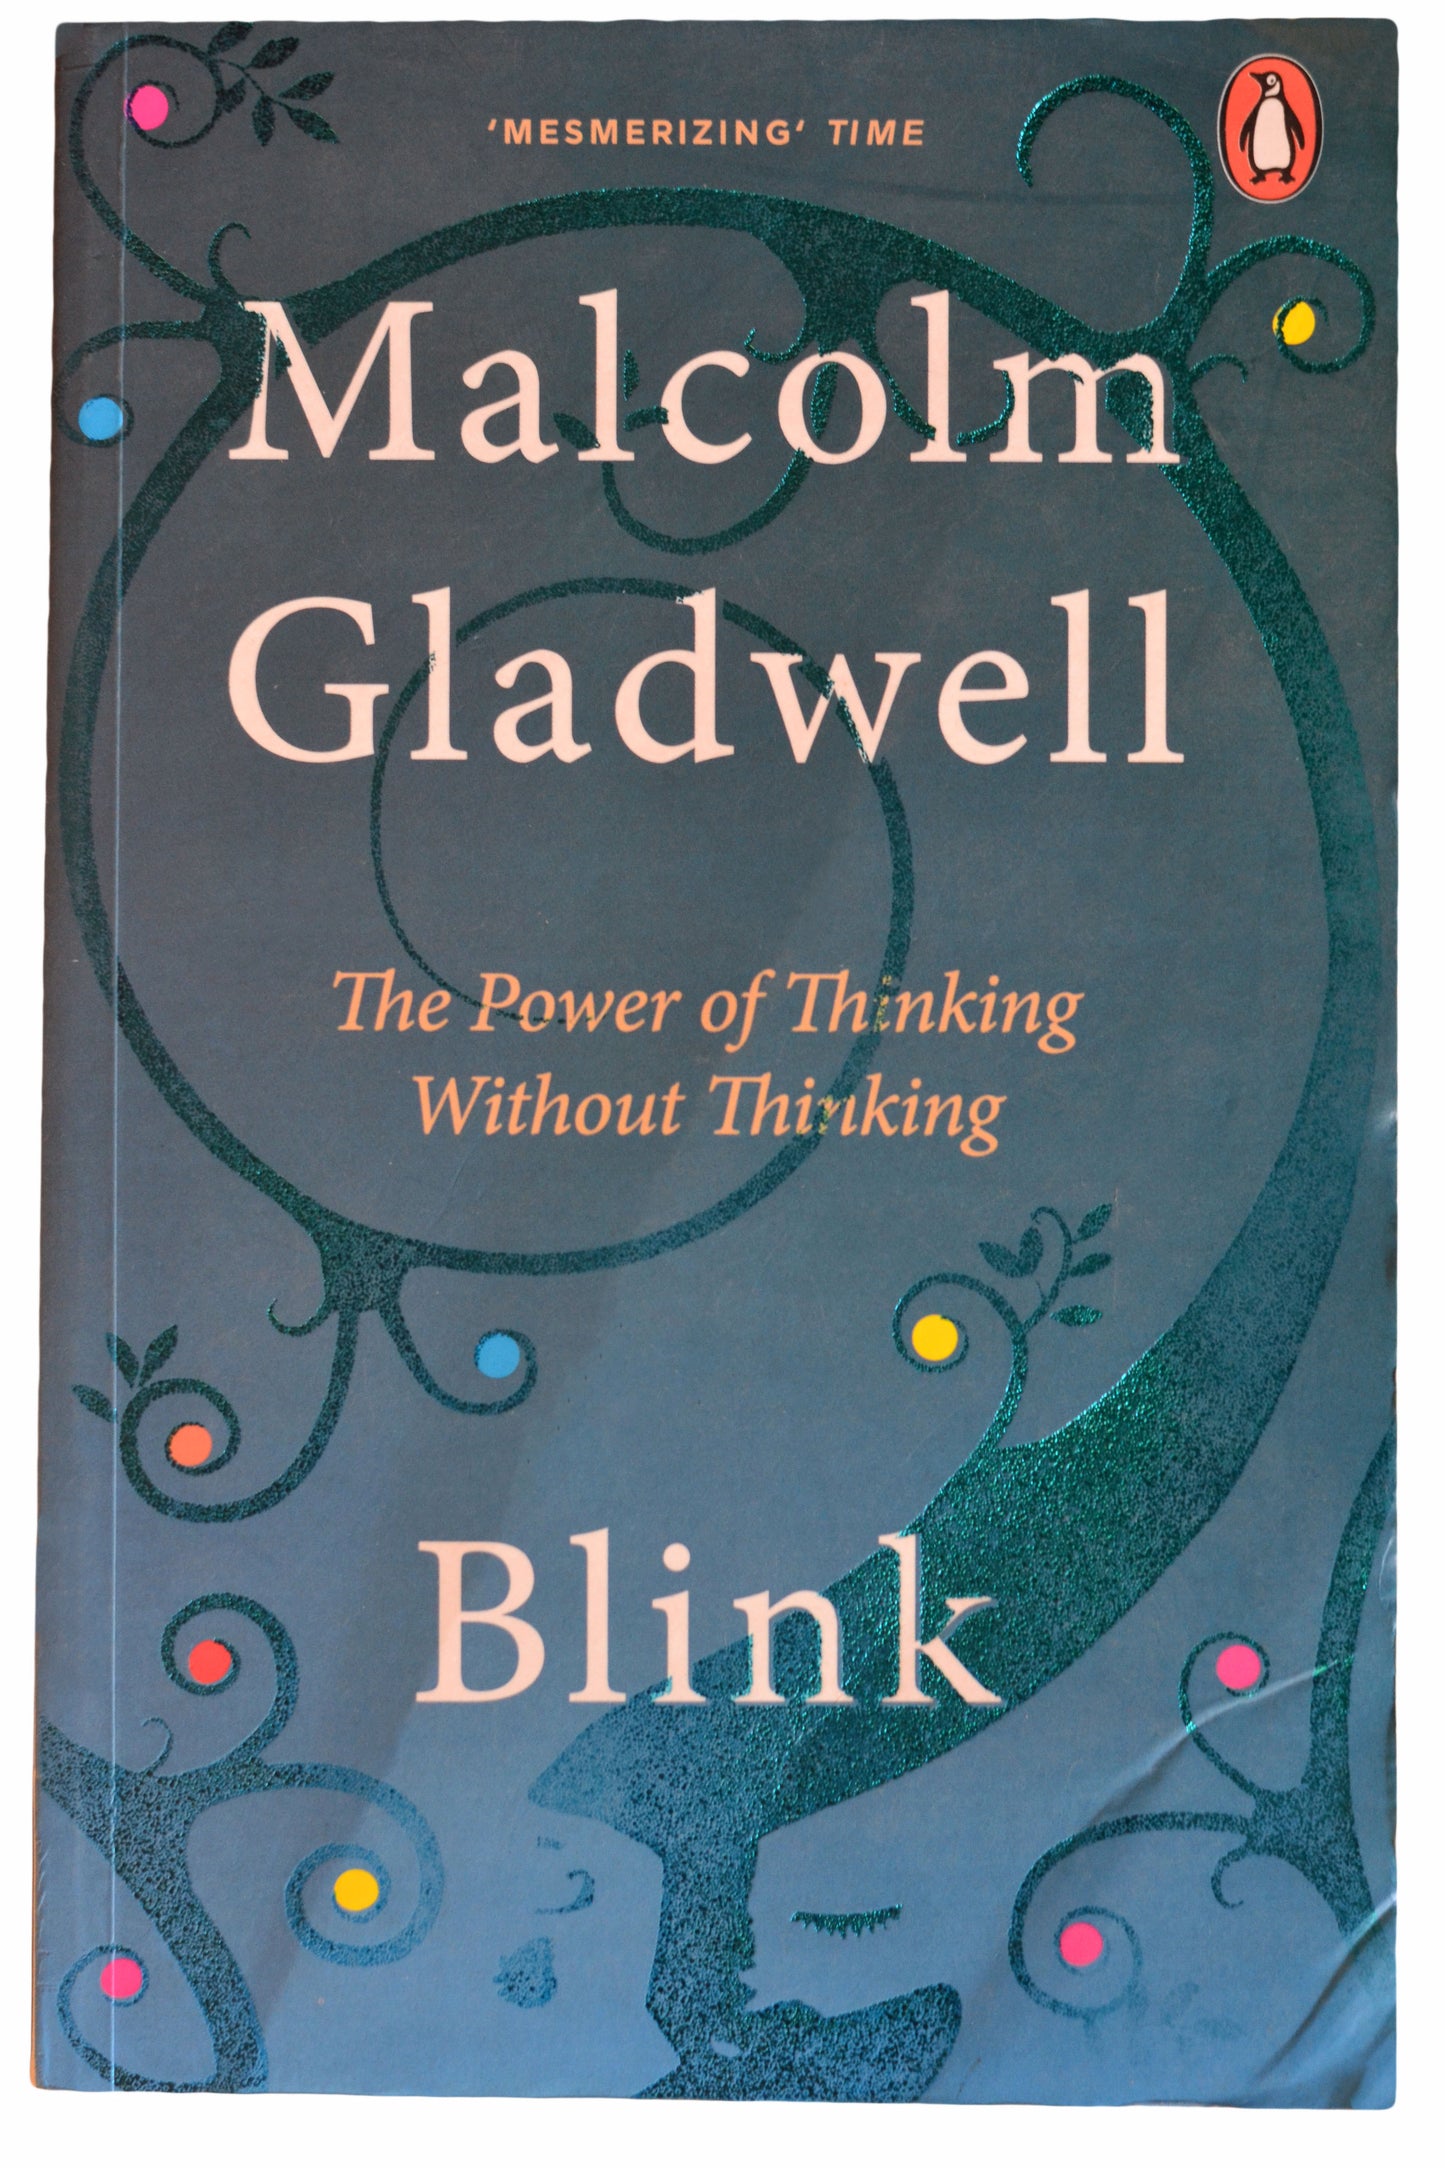 BLINK by Malcolm Gladwell